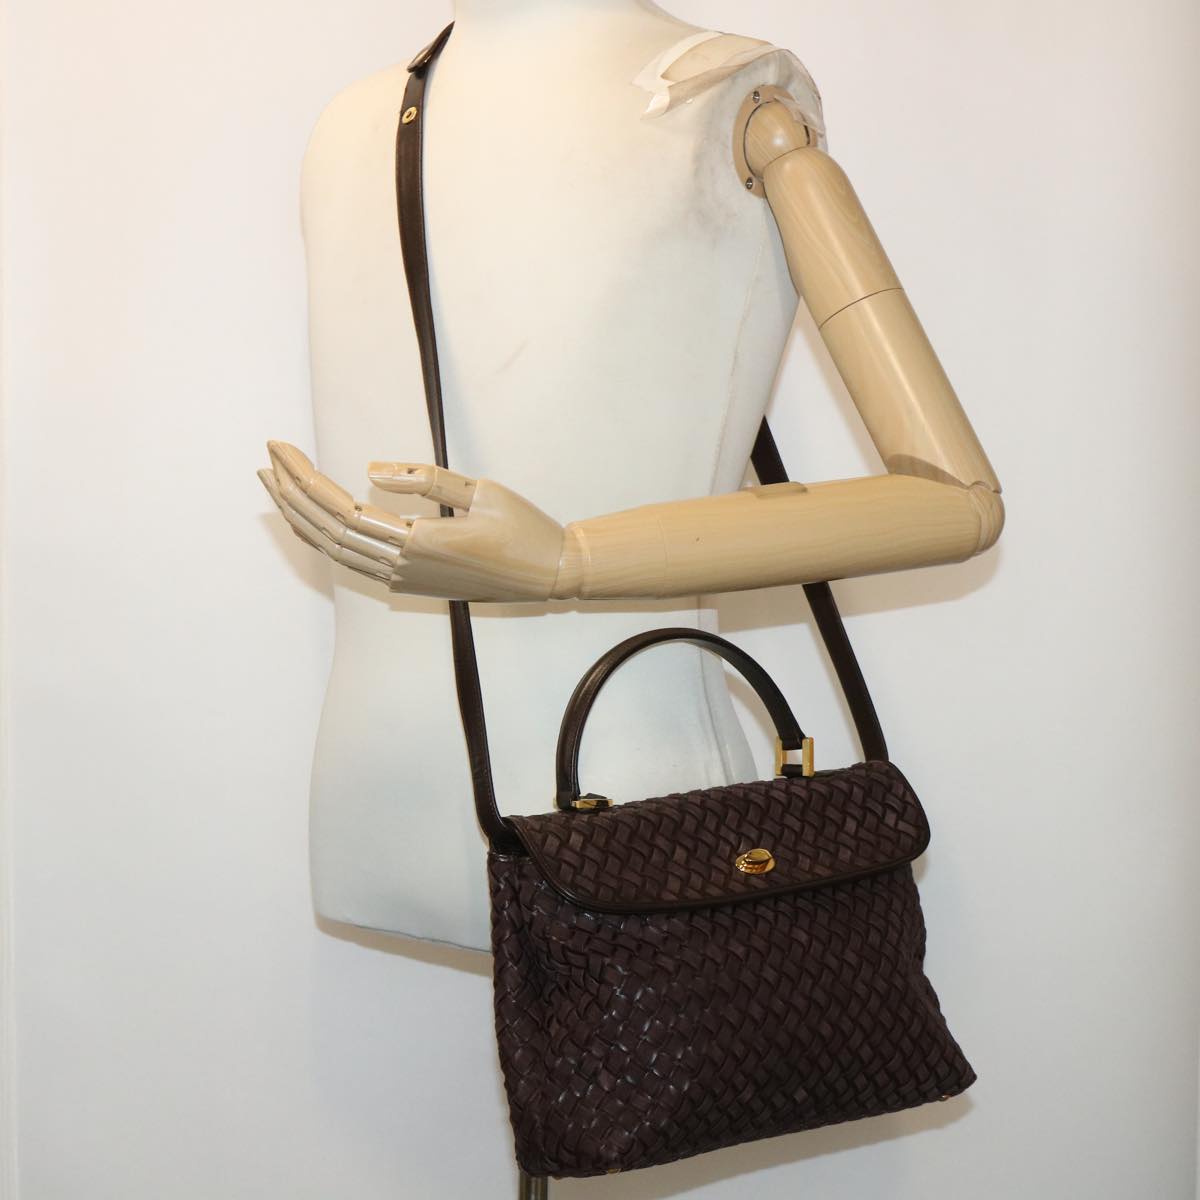 BALLY Hand Bag Suede Leather 2way Brown Auth 48108